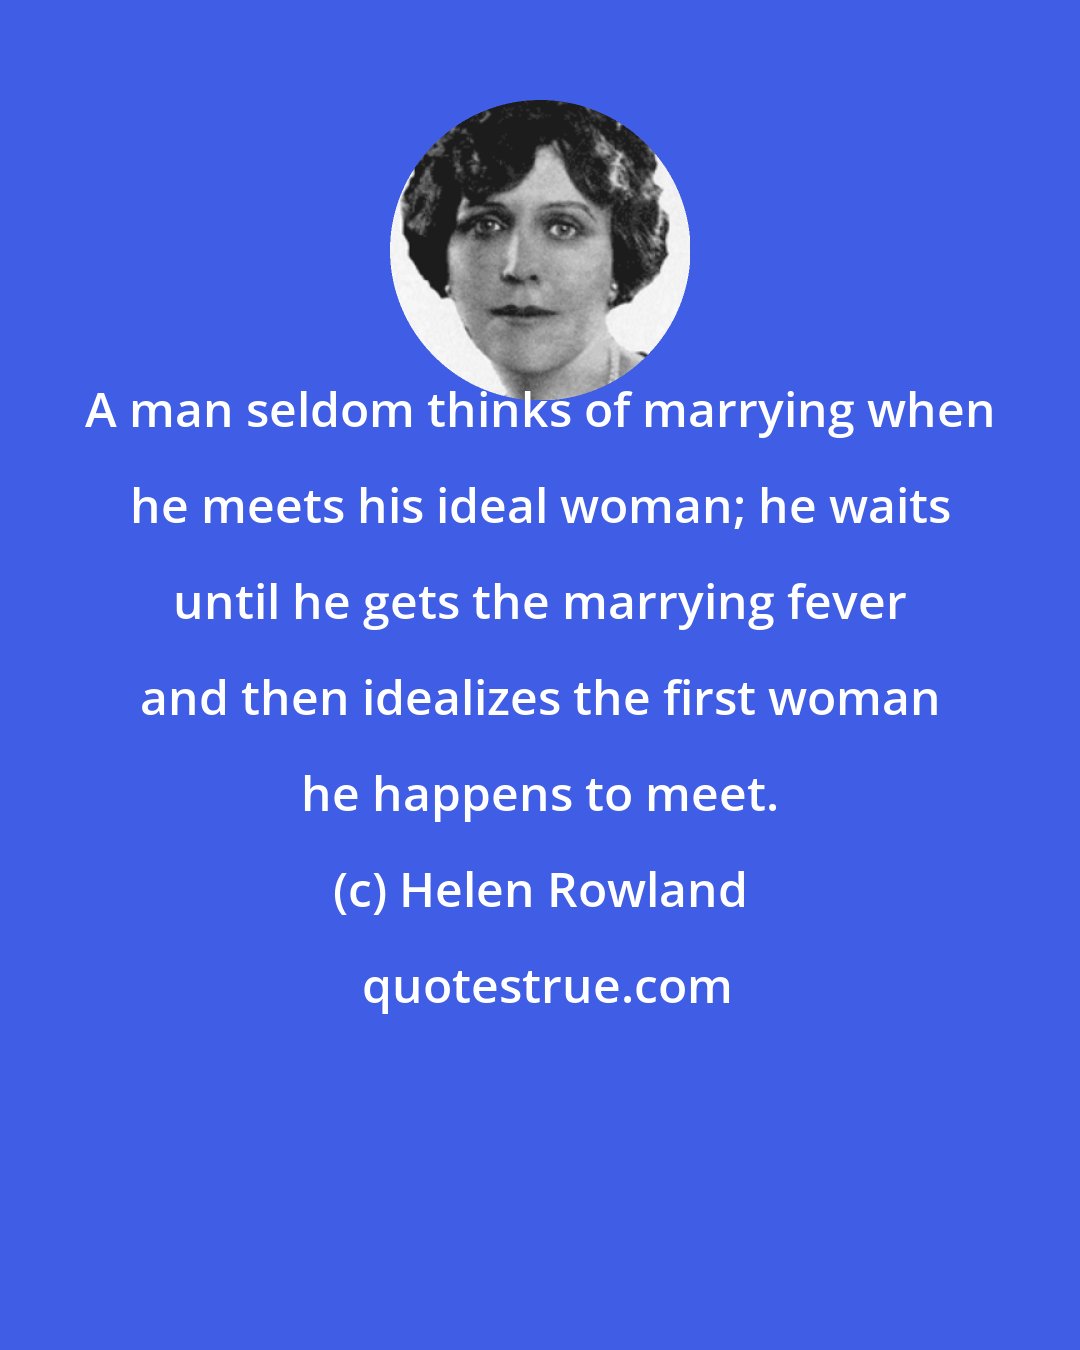 Helen Rowland: A man seldom thinks of marrying when he meets his ideal woman; he waits until he gets the marrying fever and then idealizes the first woman he happens to meet.